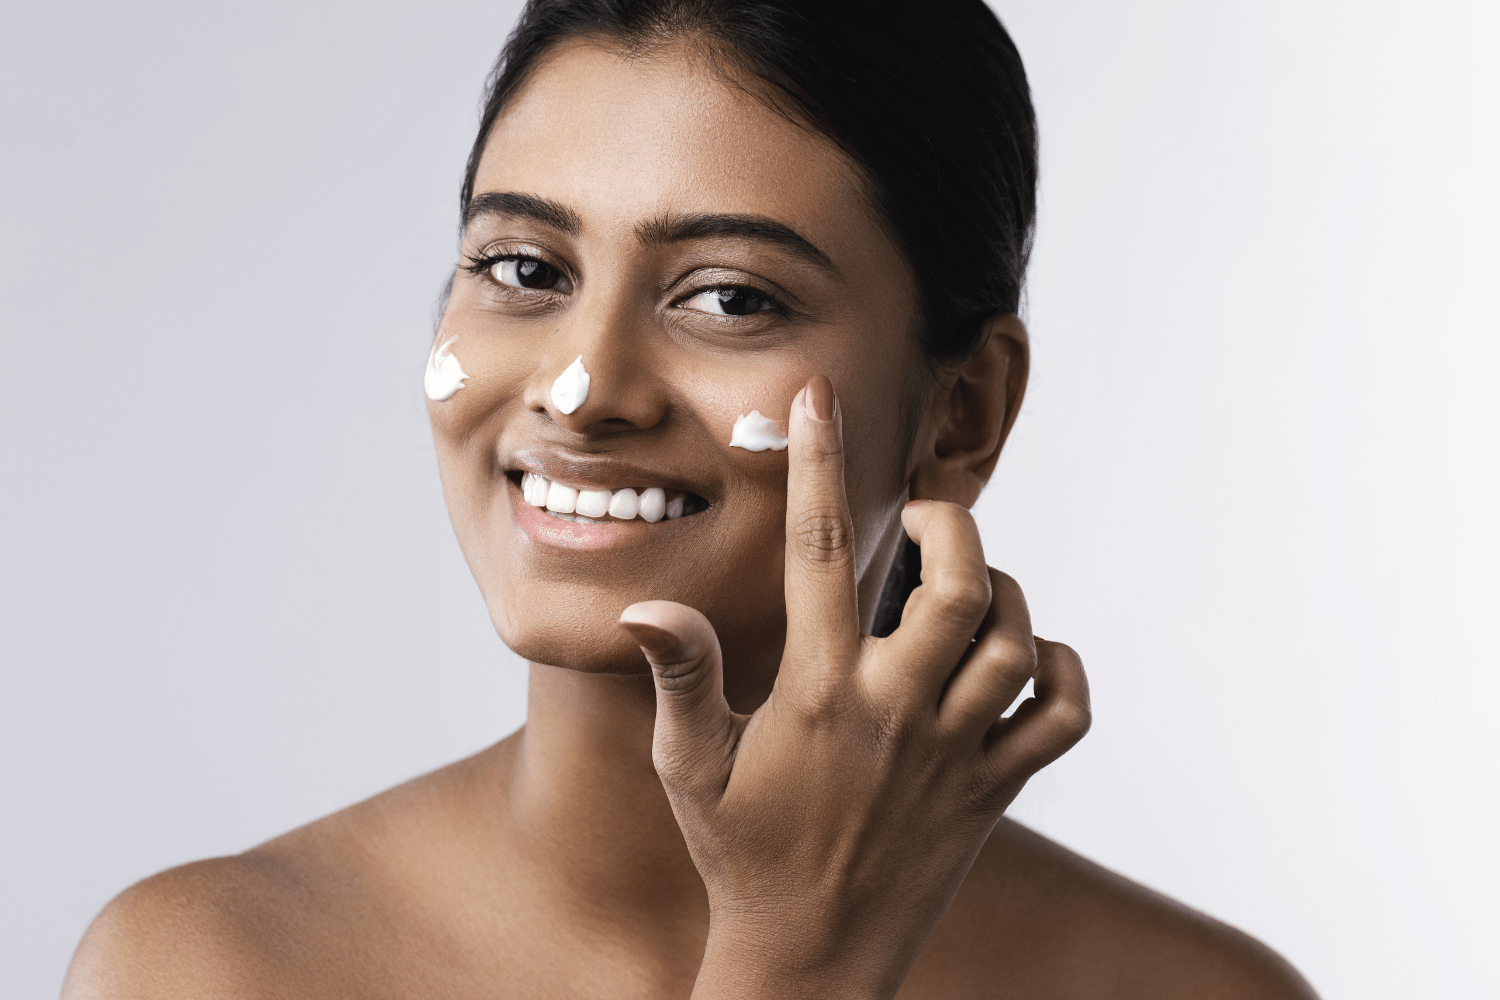 The 5 Best Picks of Niacinamide: The Anti-Aging Facial Cream You Didn't Know You Needed